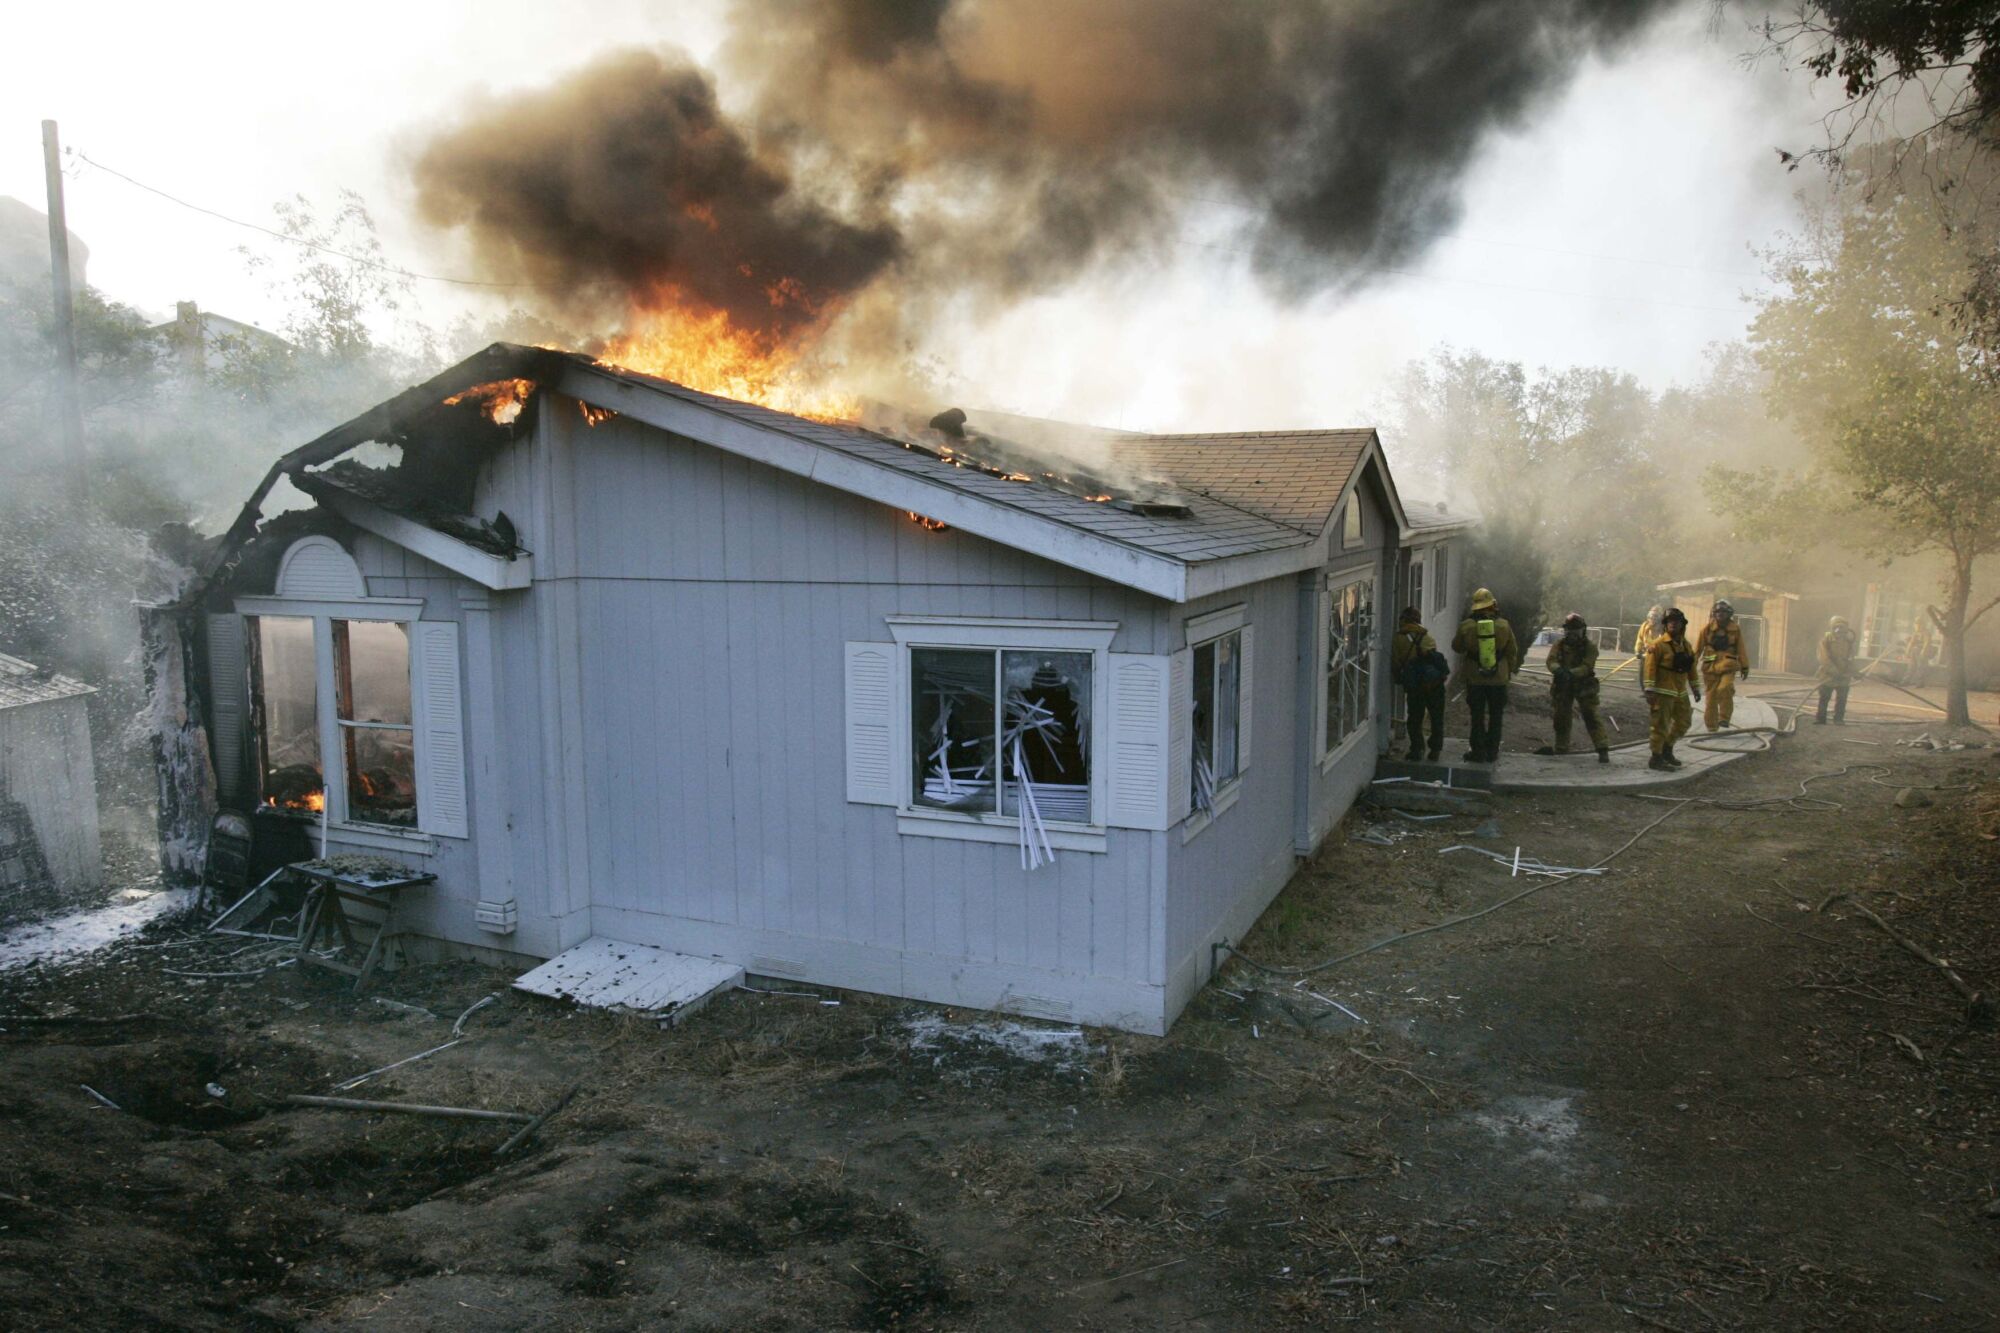 Firefighters battle a house fire on Honey Springs Road, north of Dulzura, during the Harris fire in 2007.